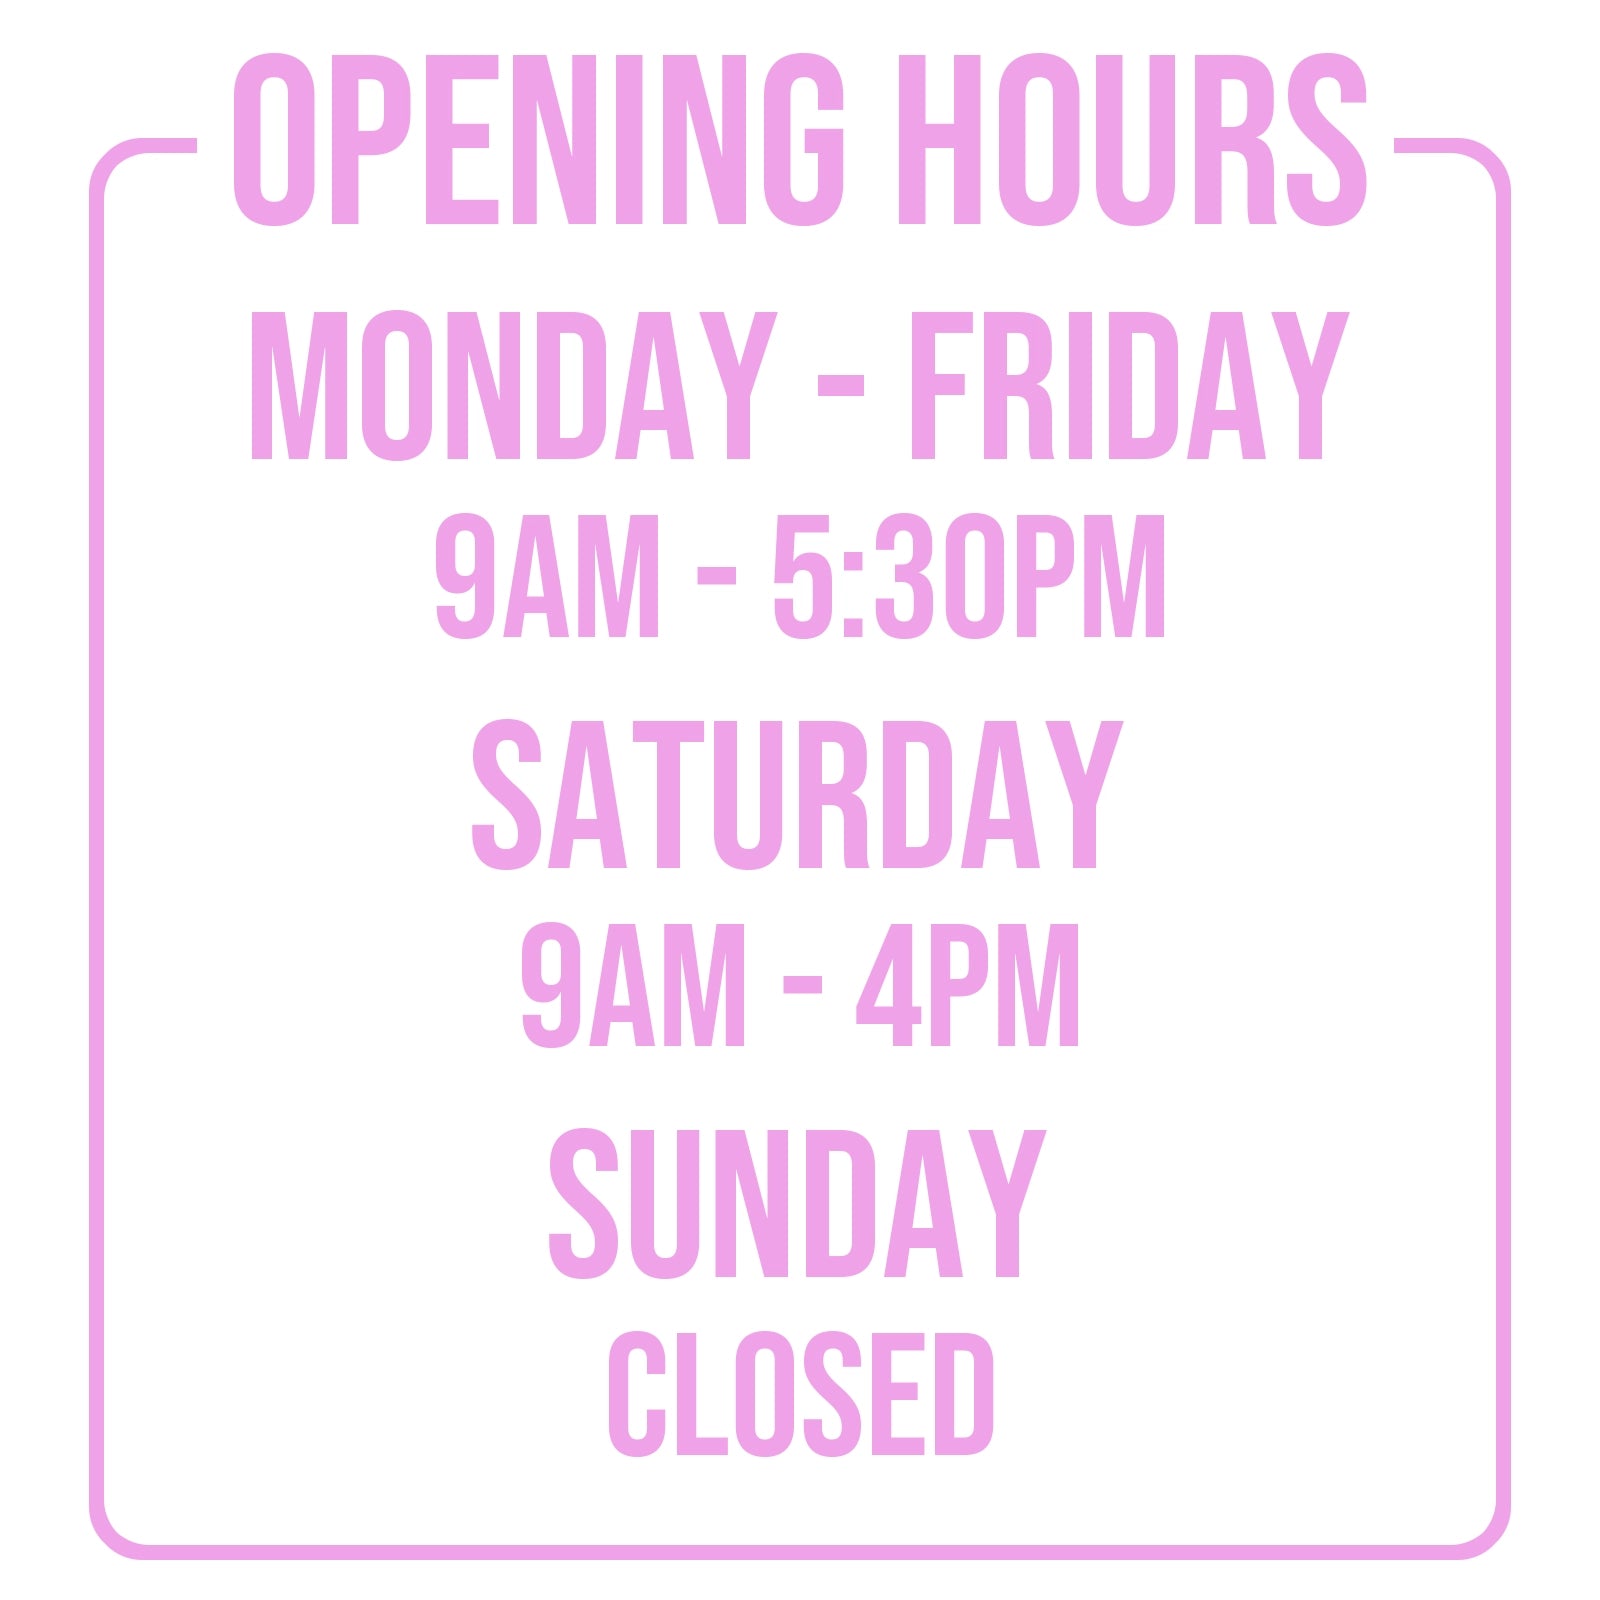 Opening Times for Shop Business Window in Pink